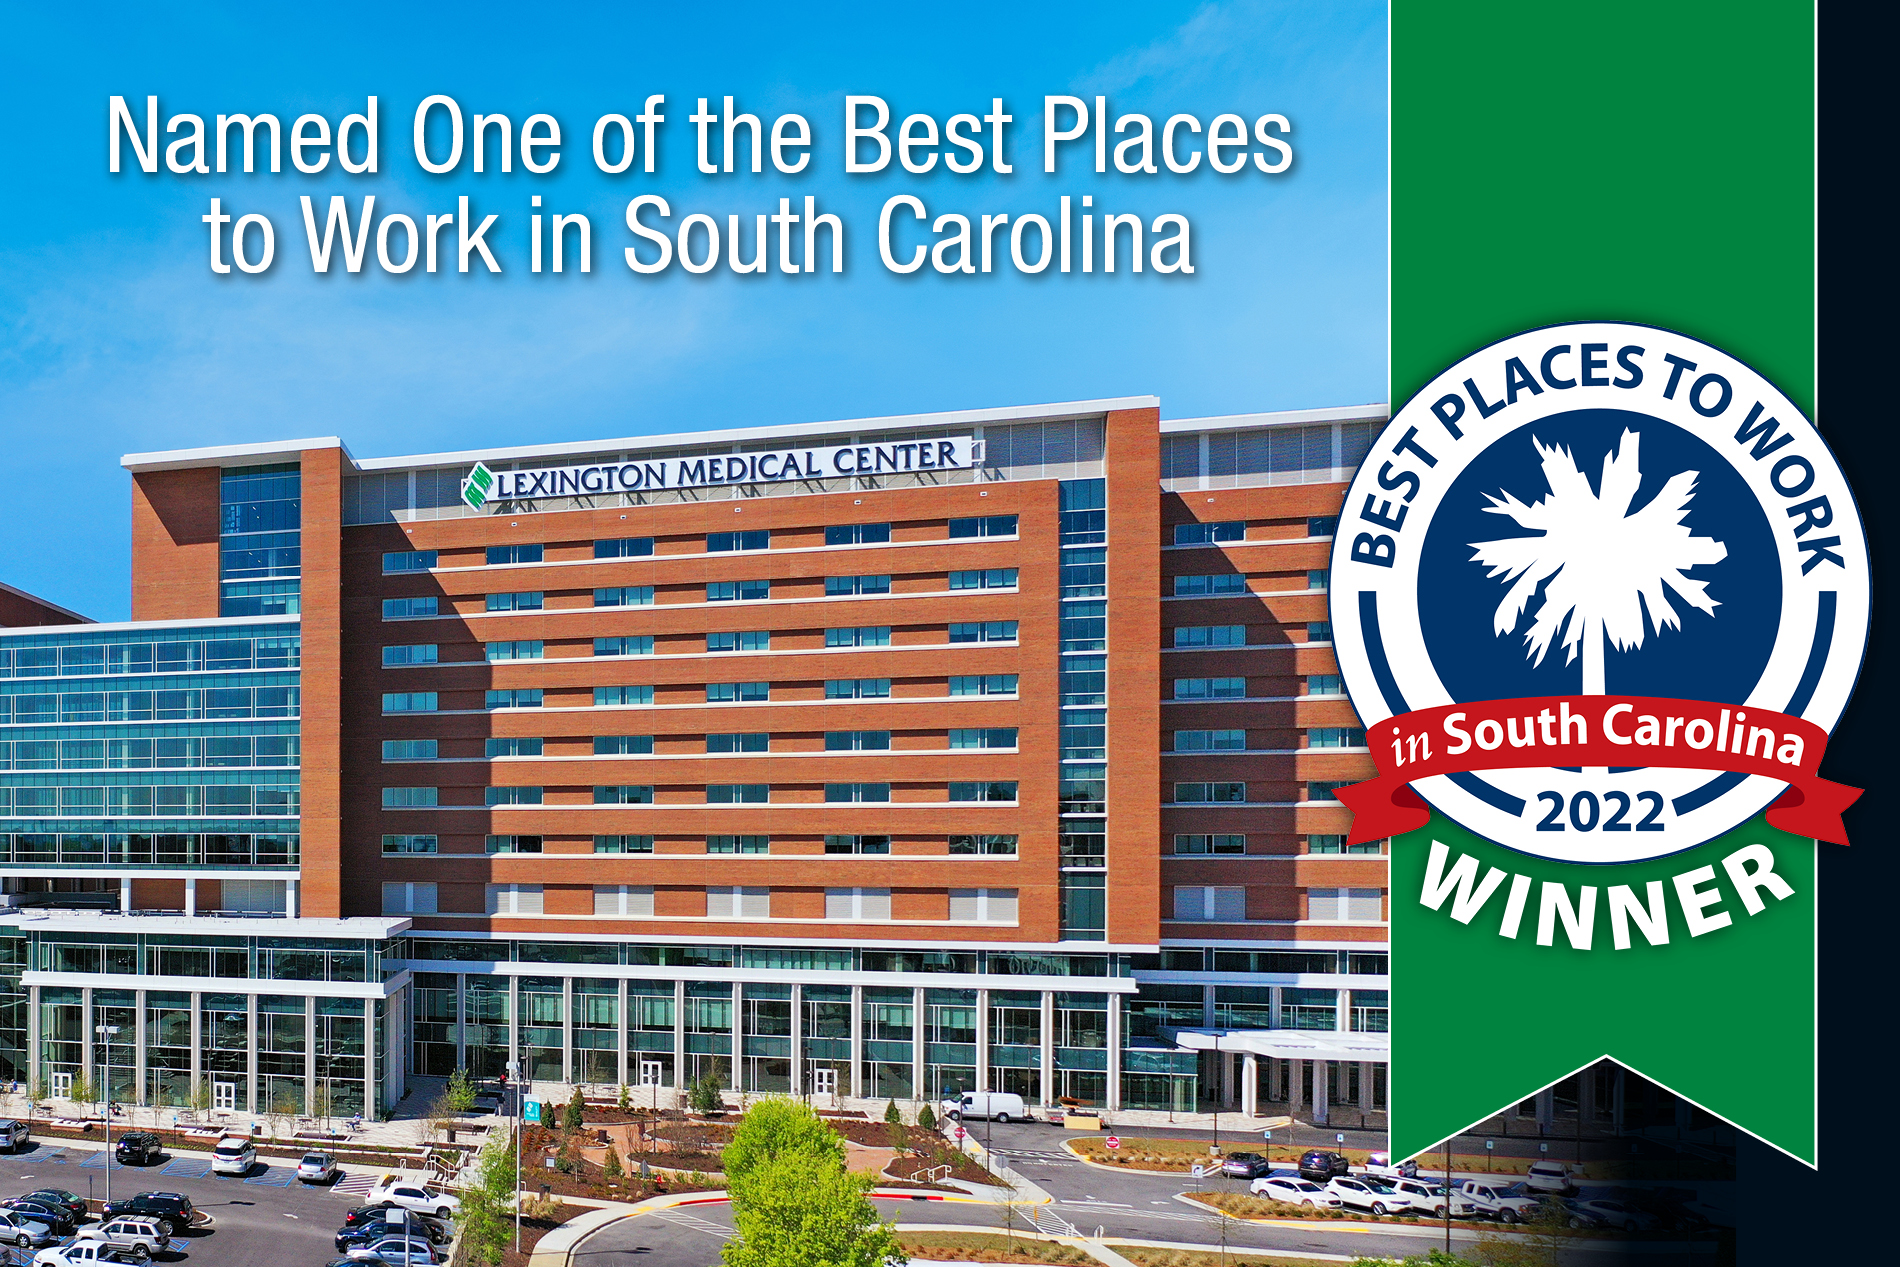 Photo of Lexington Medical Center along with Best Place to Work logo seal